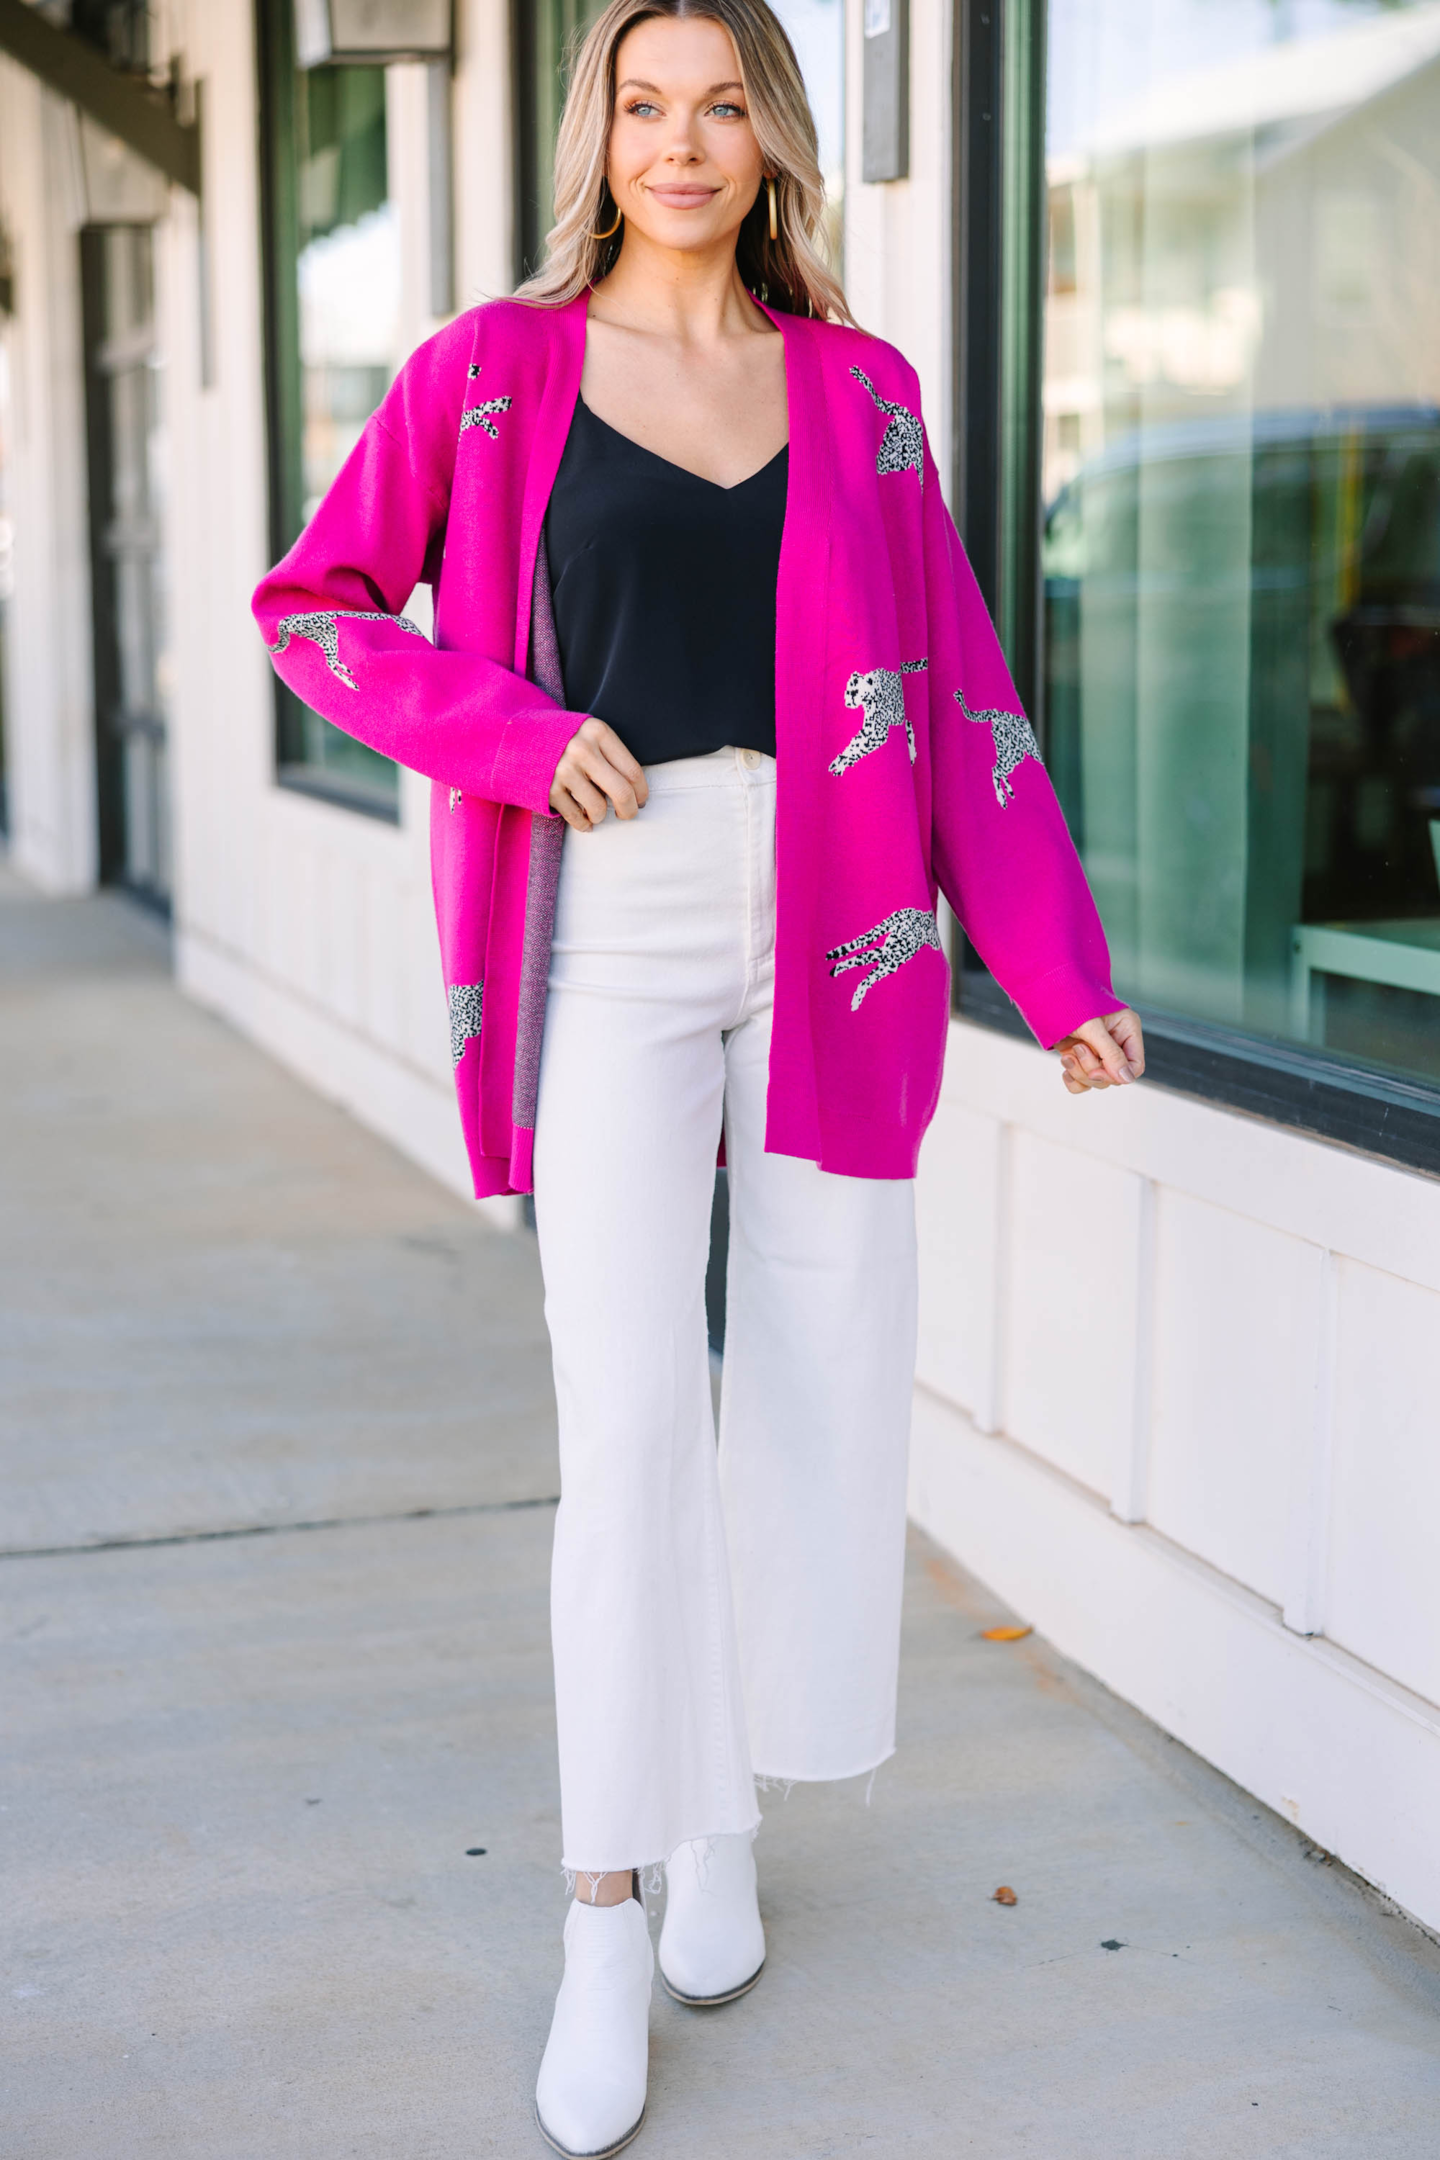 https://shopthemint.com/products/quick-decisions-pink-cheetah-cardigan?variant=39770570129466